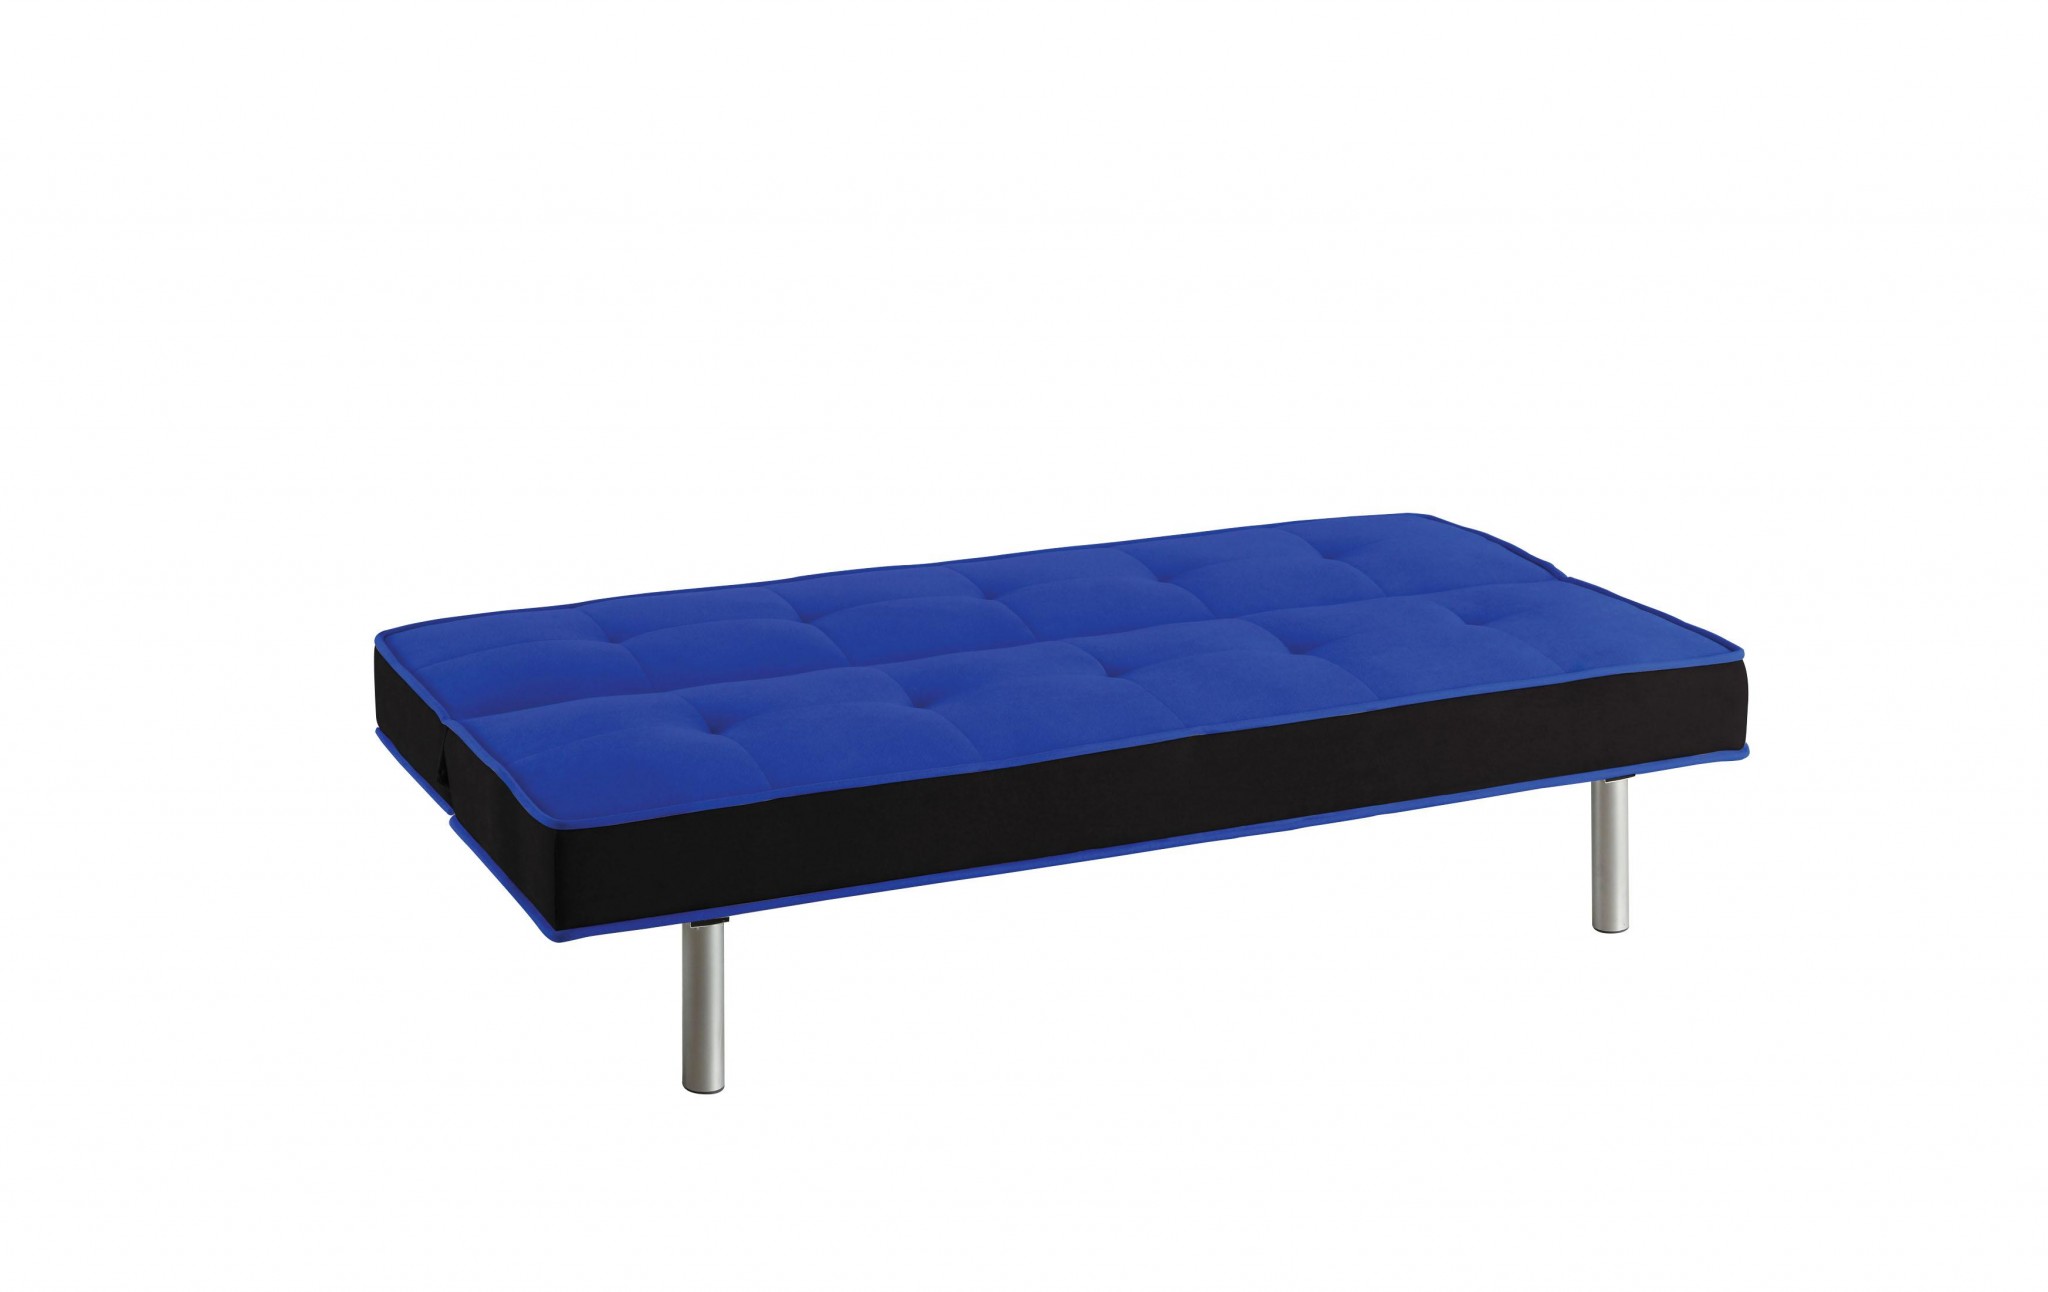 66" X 18" X 29" Blue & Black Flannnel Adjustable Couch